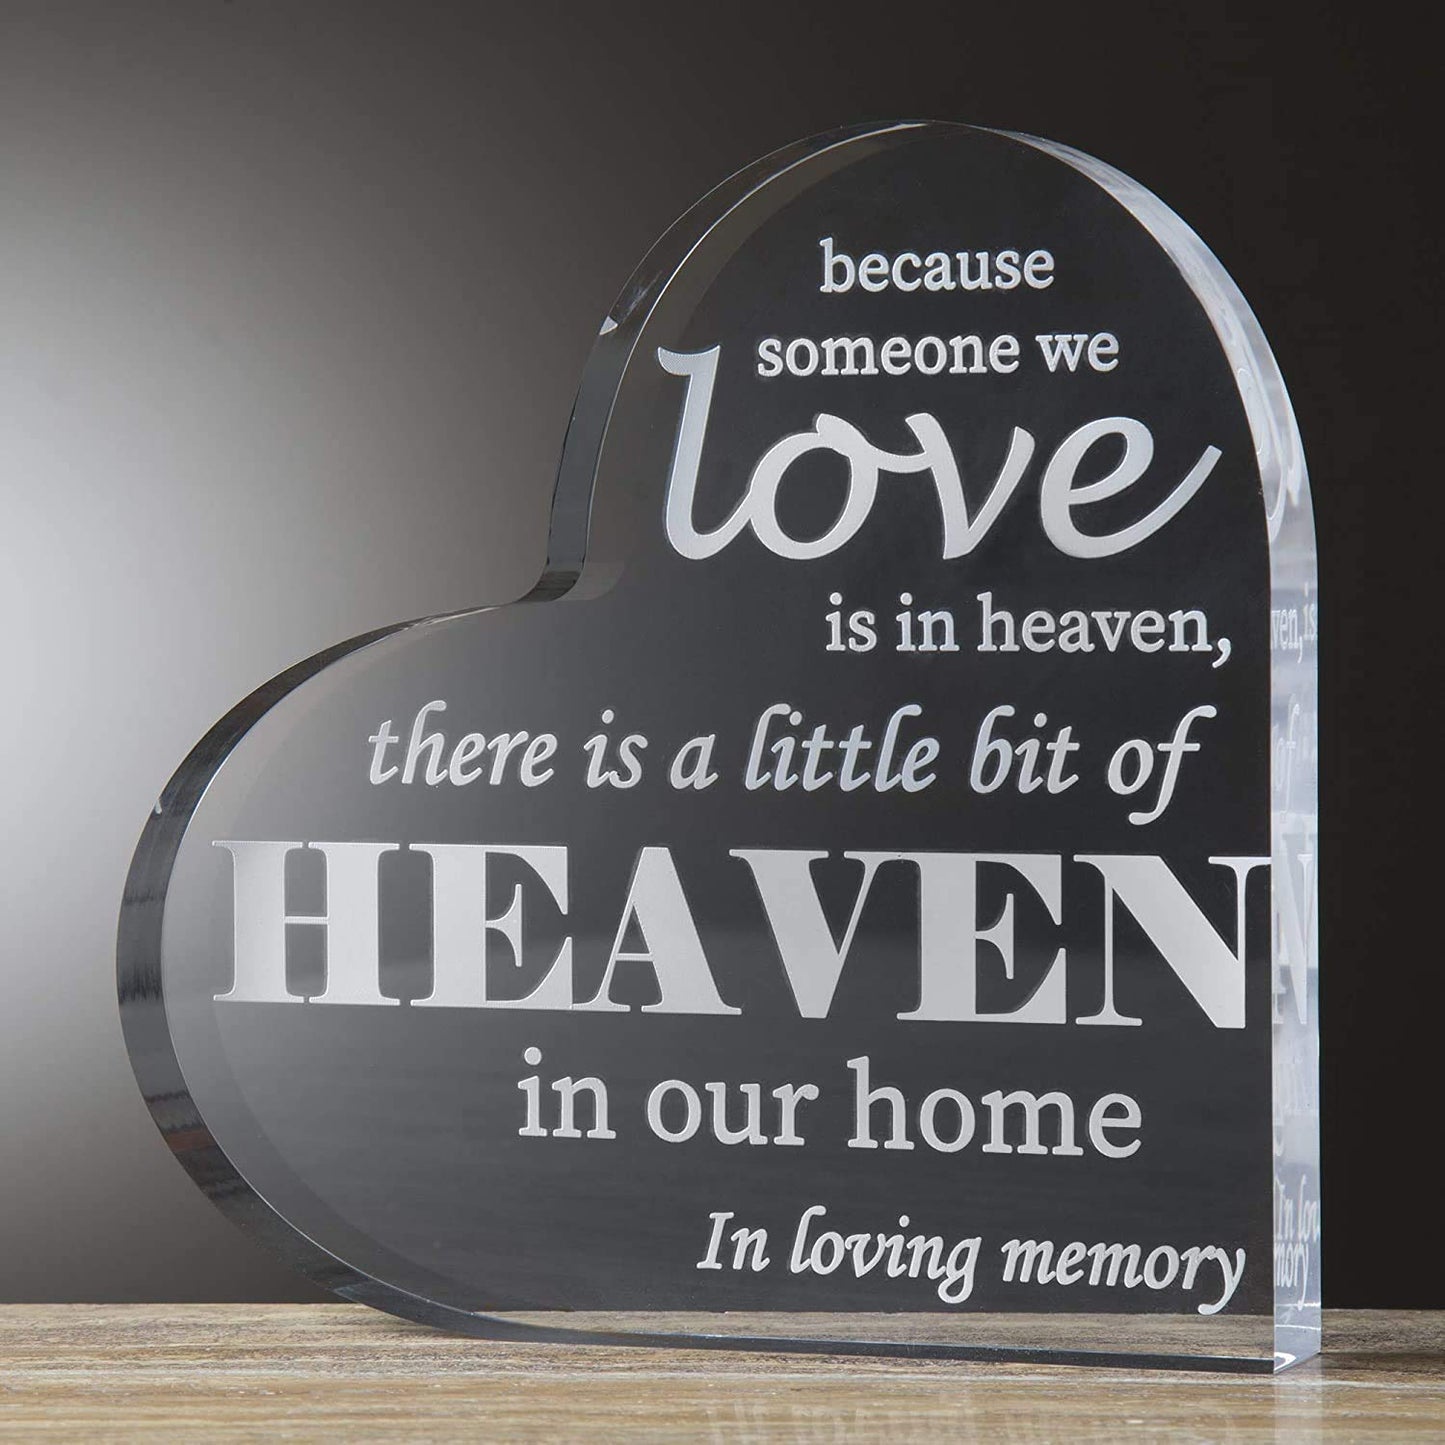 Magara Memorial Gifts - Sympathy Gift - Bereavement Gifts - Condolence Gifts for Loss of Loved One - Sympathy Gifts for Loss of Father - Sympathy Gifts for Loss of Mother - Remembrance Gifts